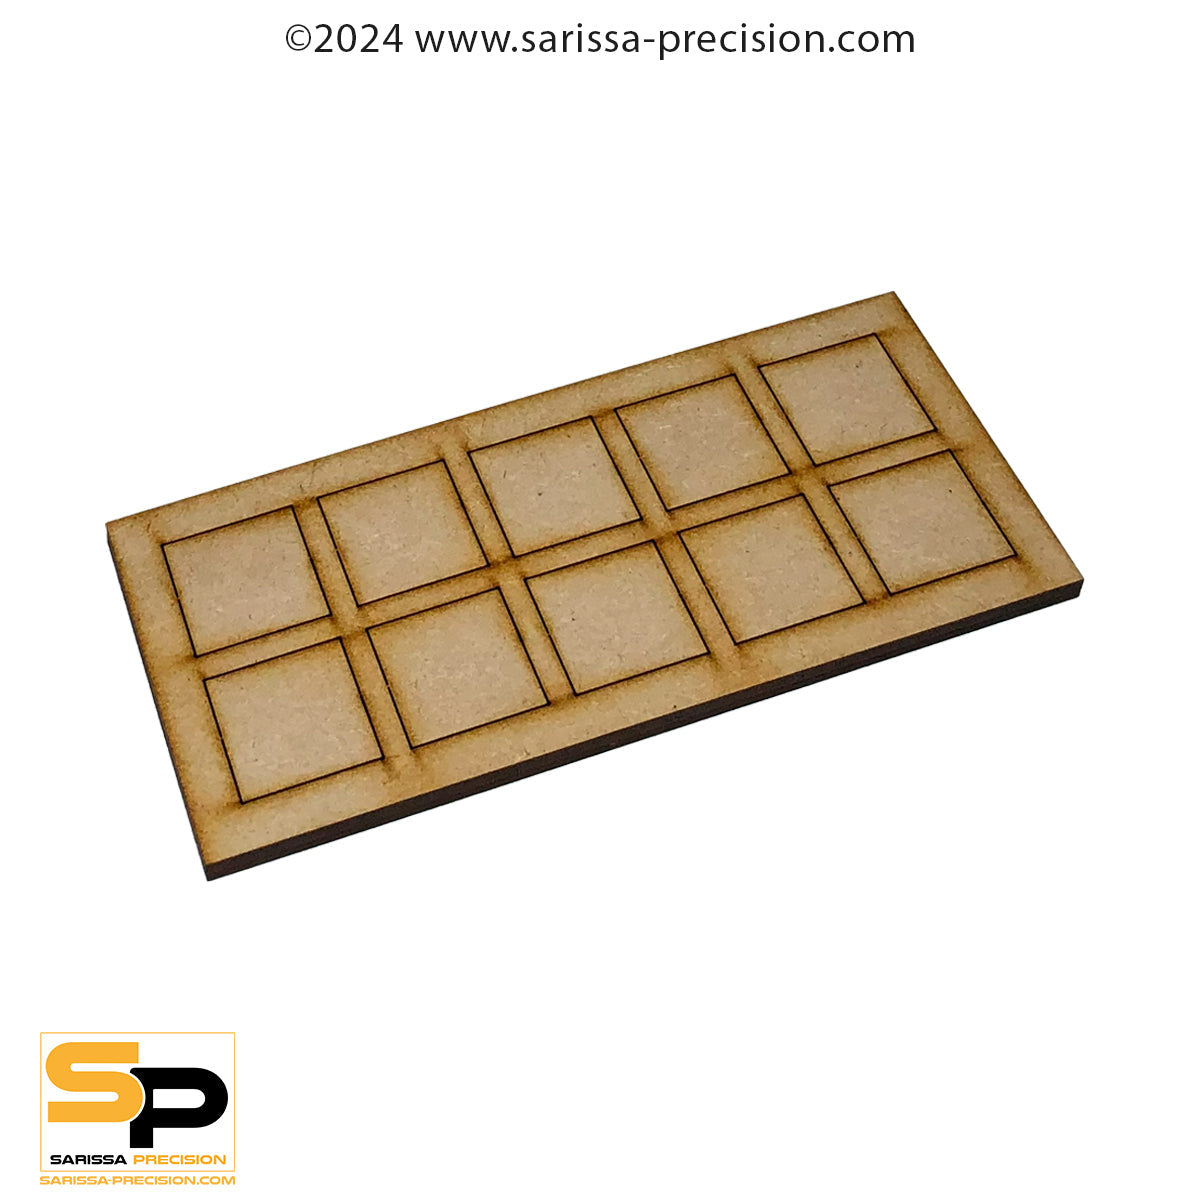 11 x 6 30x30mm Conversion Tray for 25x25mm bases